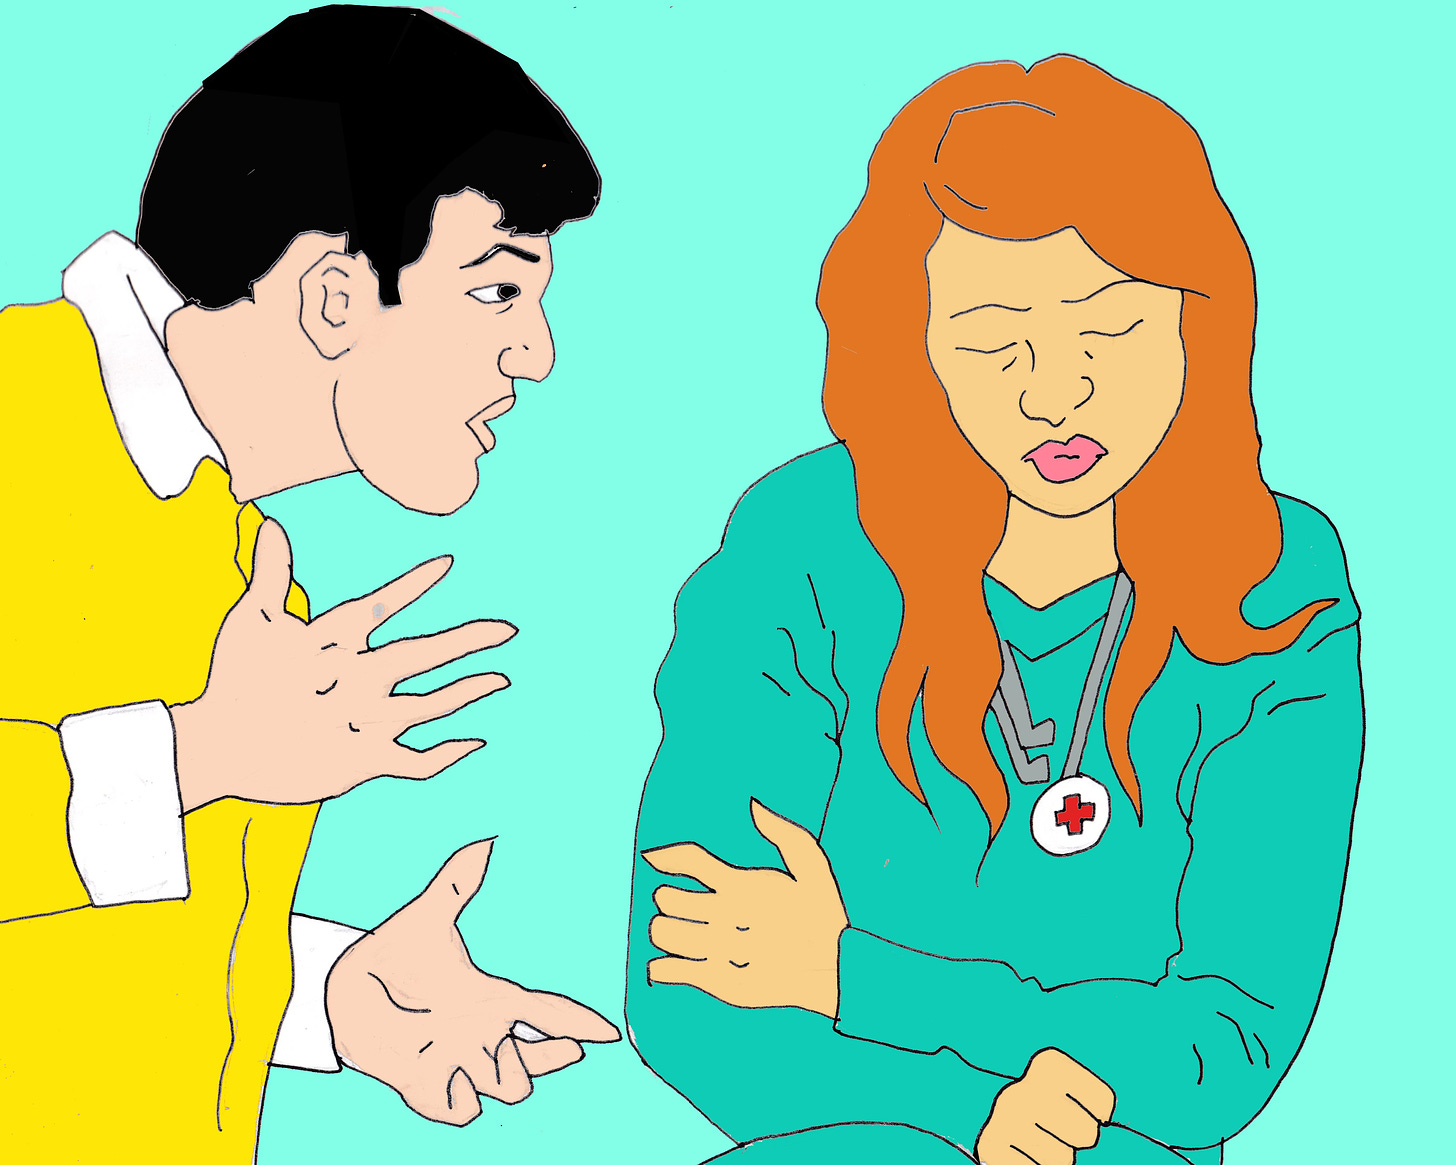 Drawing of a man nagging his female partner.